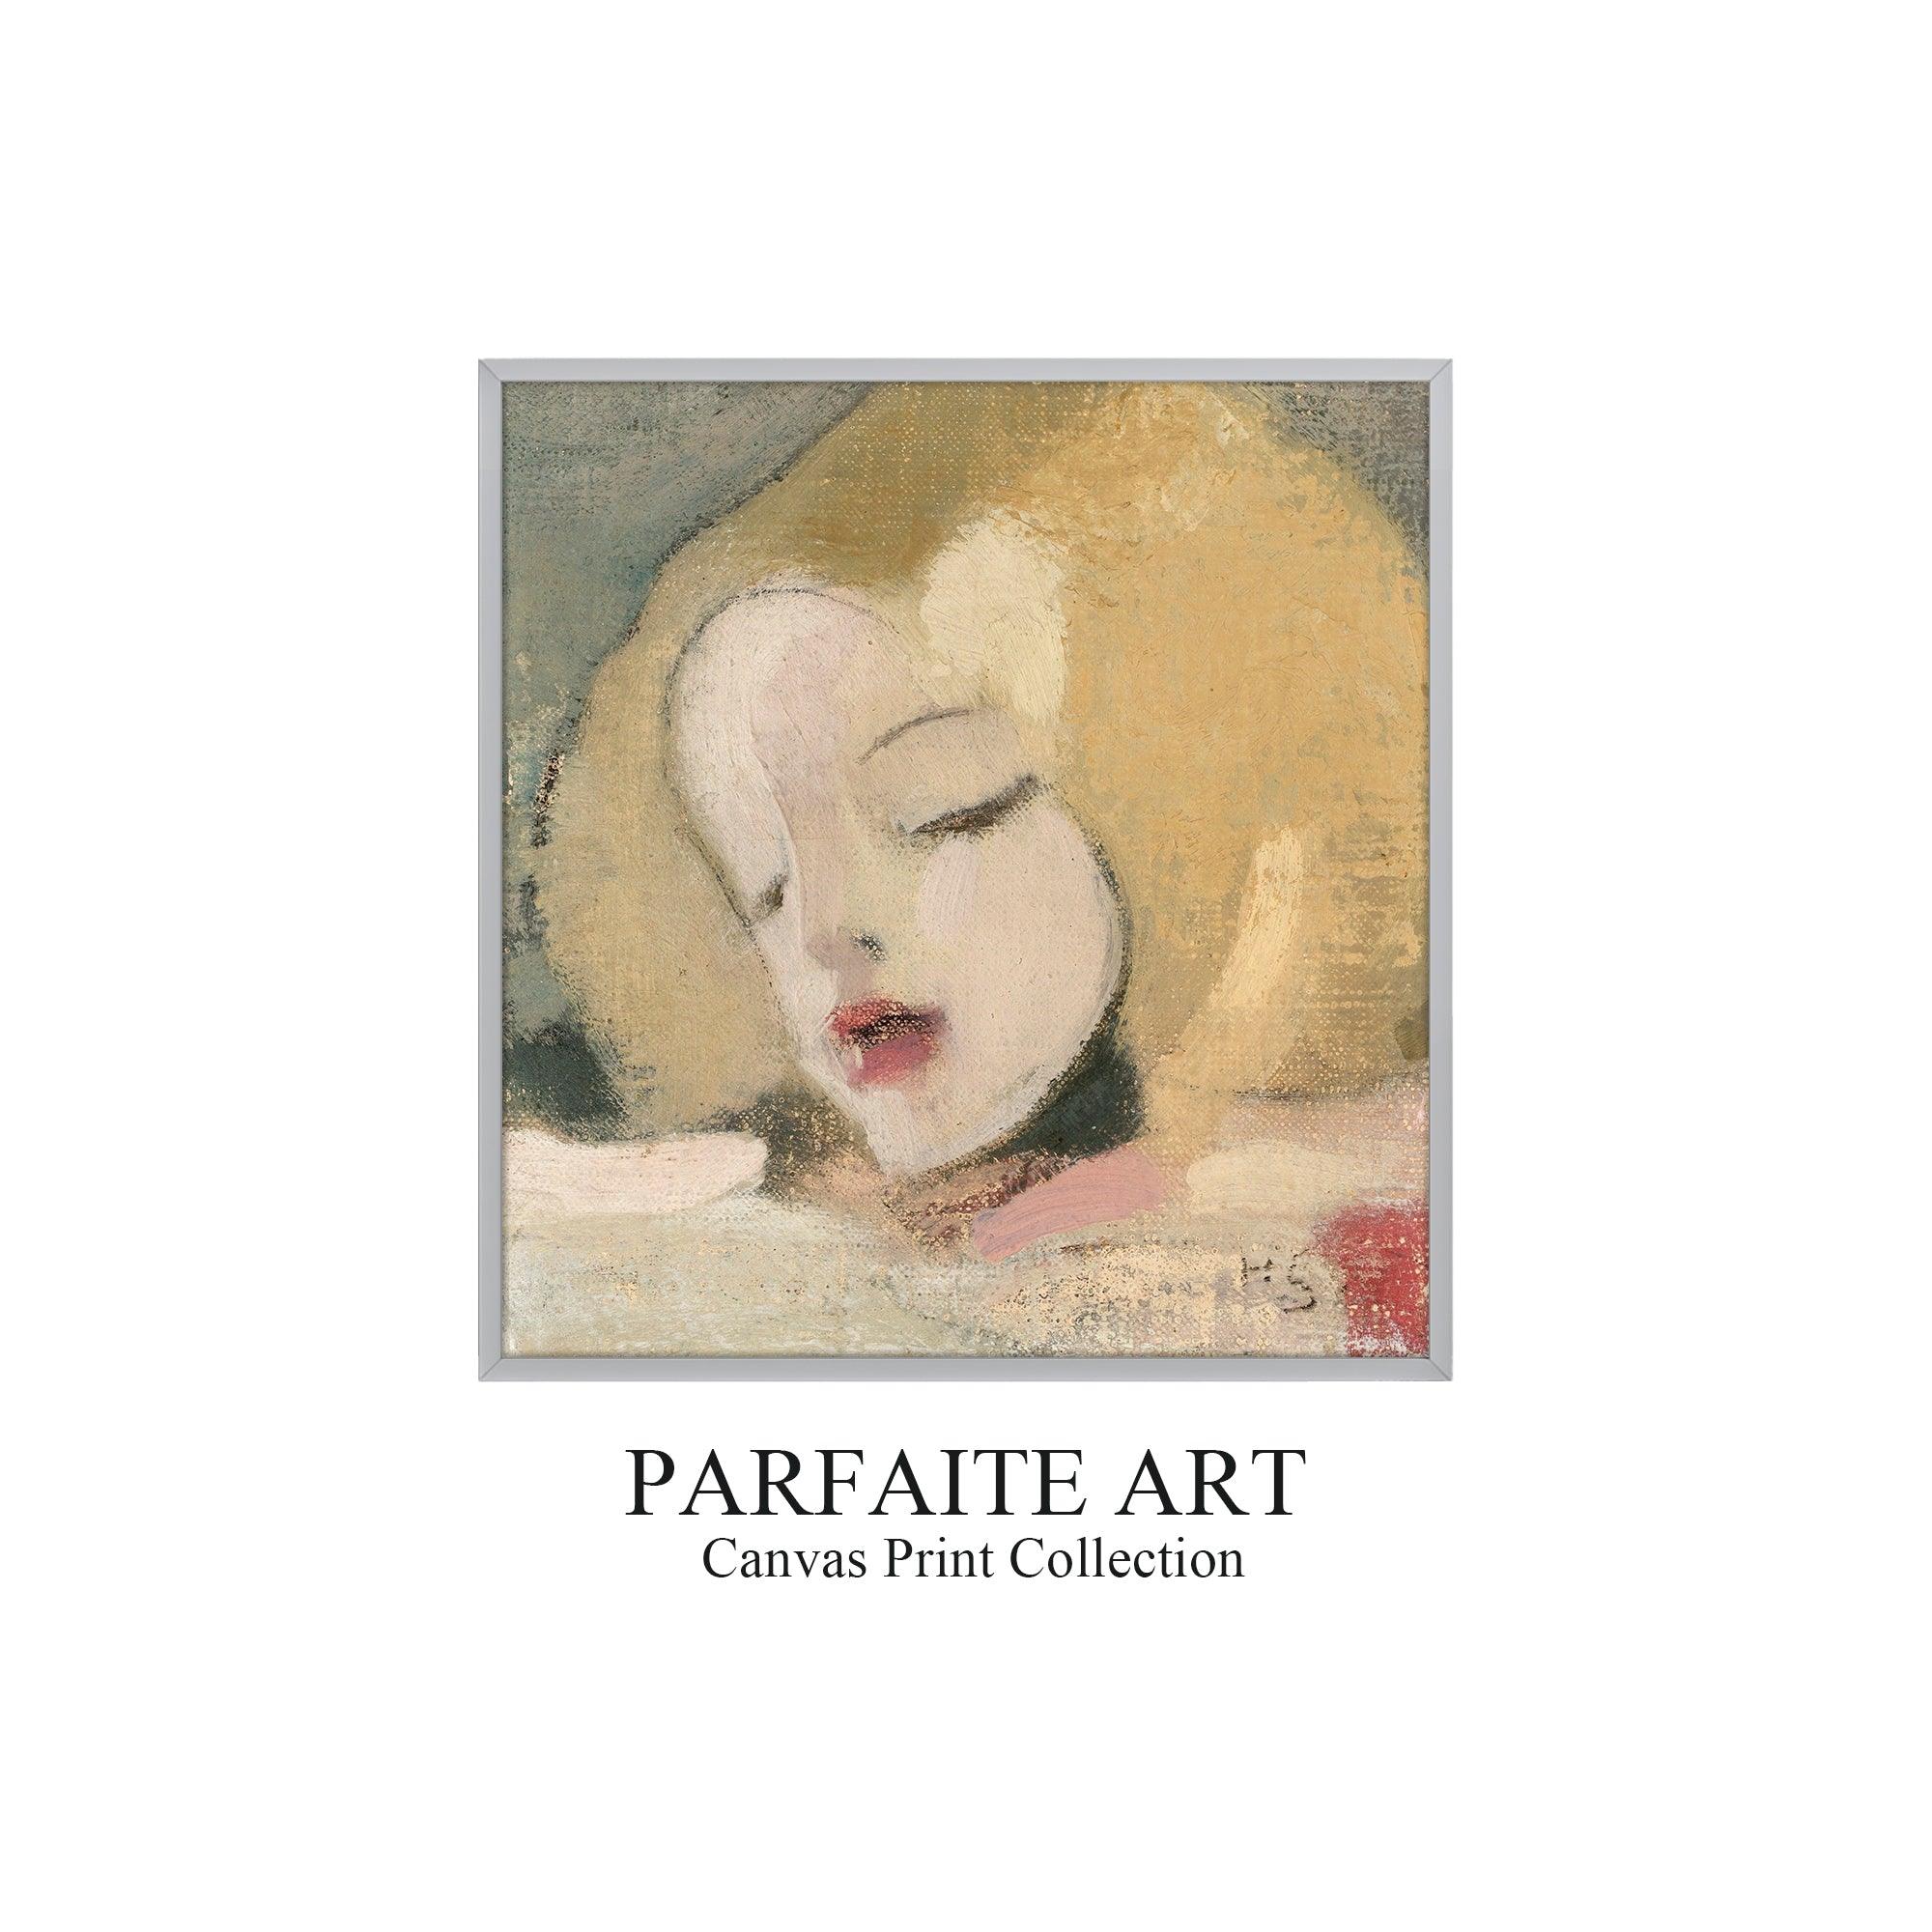 Classic Vintage Wall Art Prints: Giclée Quality, World-Renowned Paintings & Art Deco Prints, Expressionism Oil Painting - Available on Printable Canvas #88